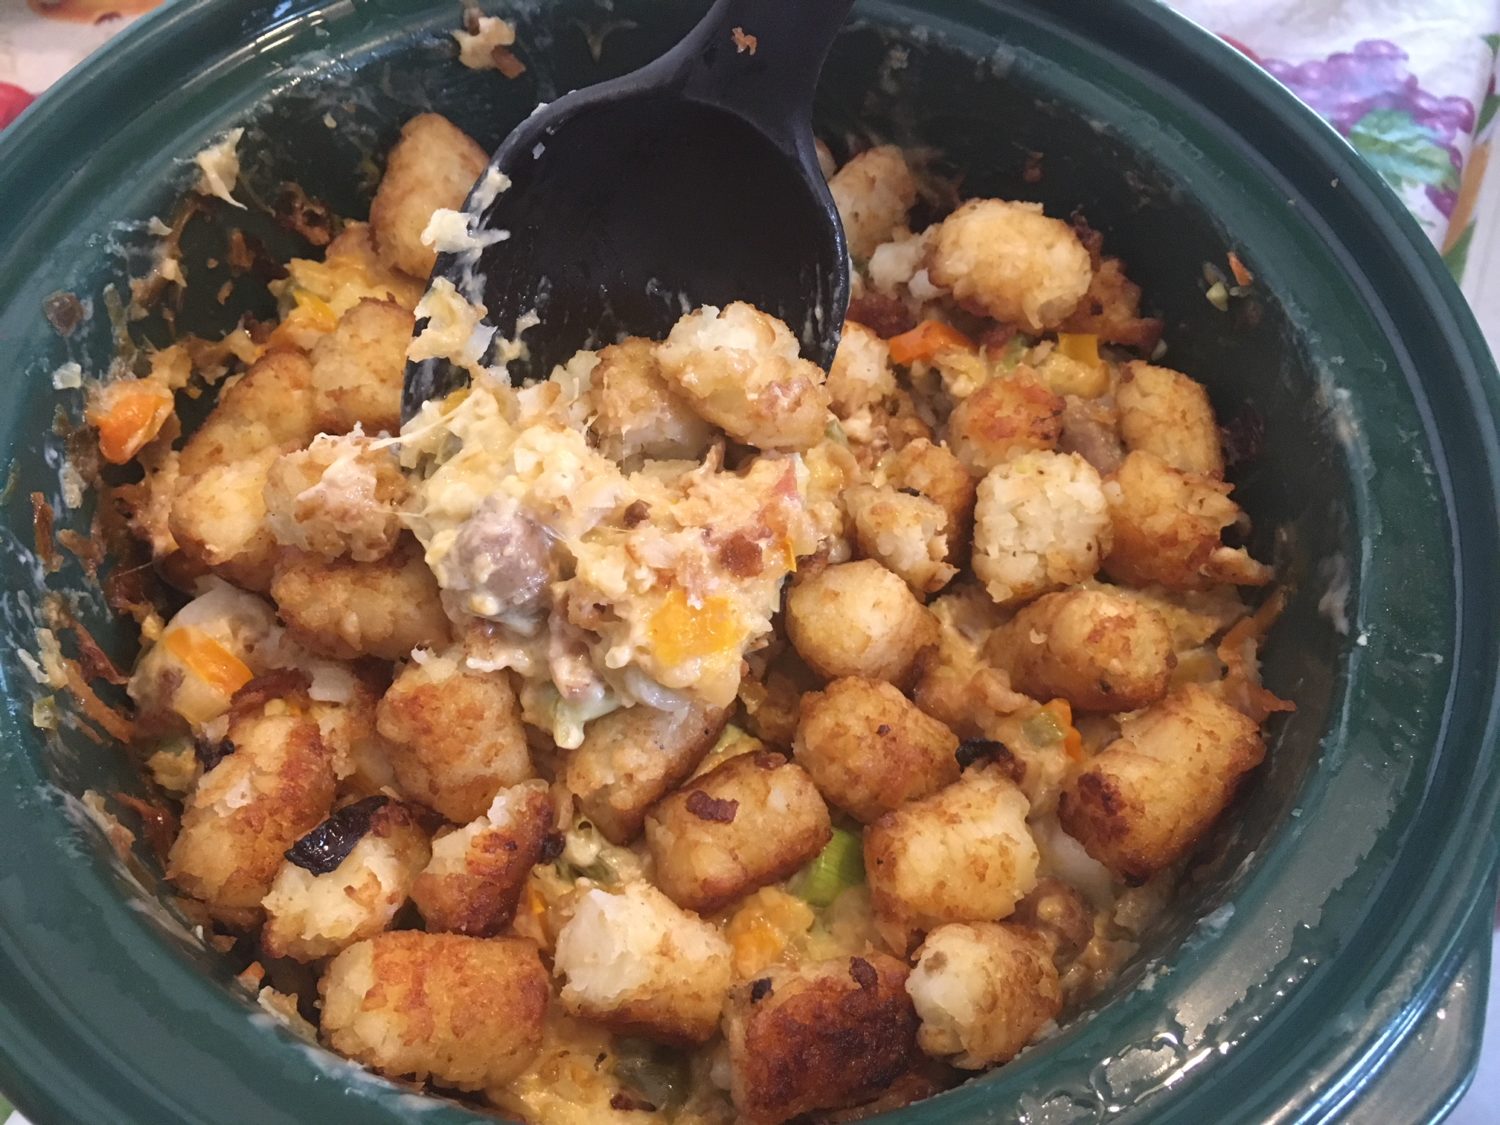 Tater Tot Casserole in the Slow Cooker